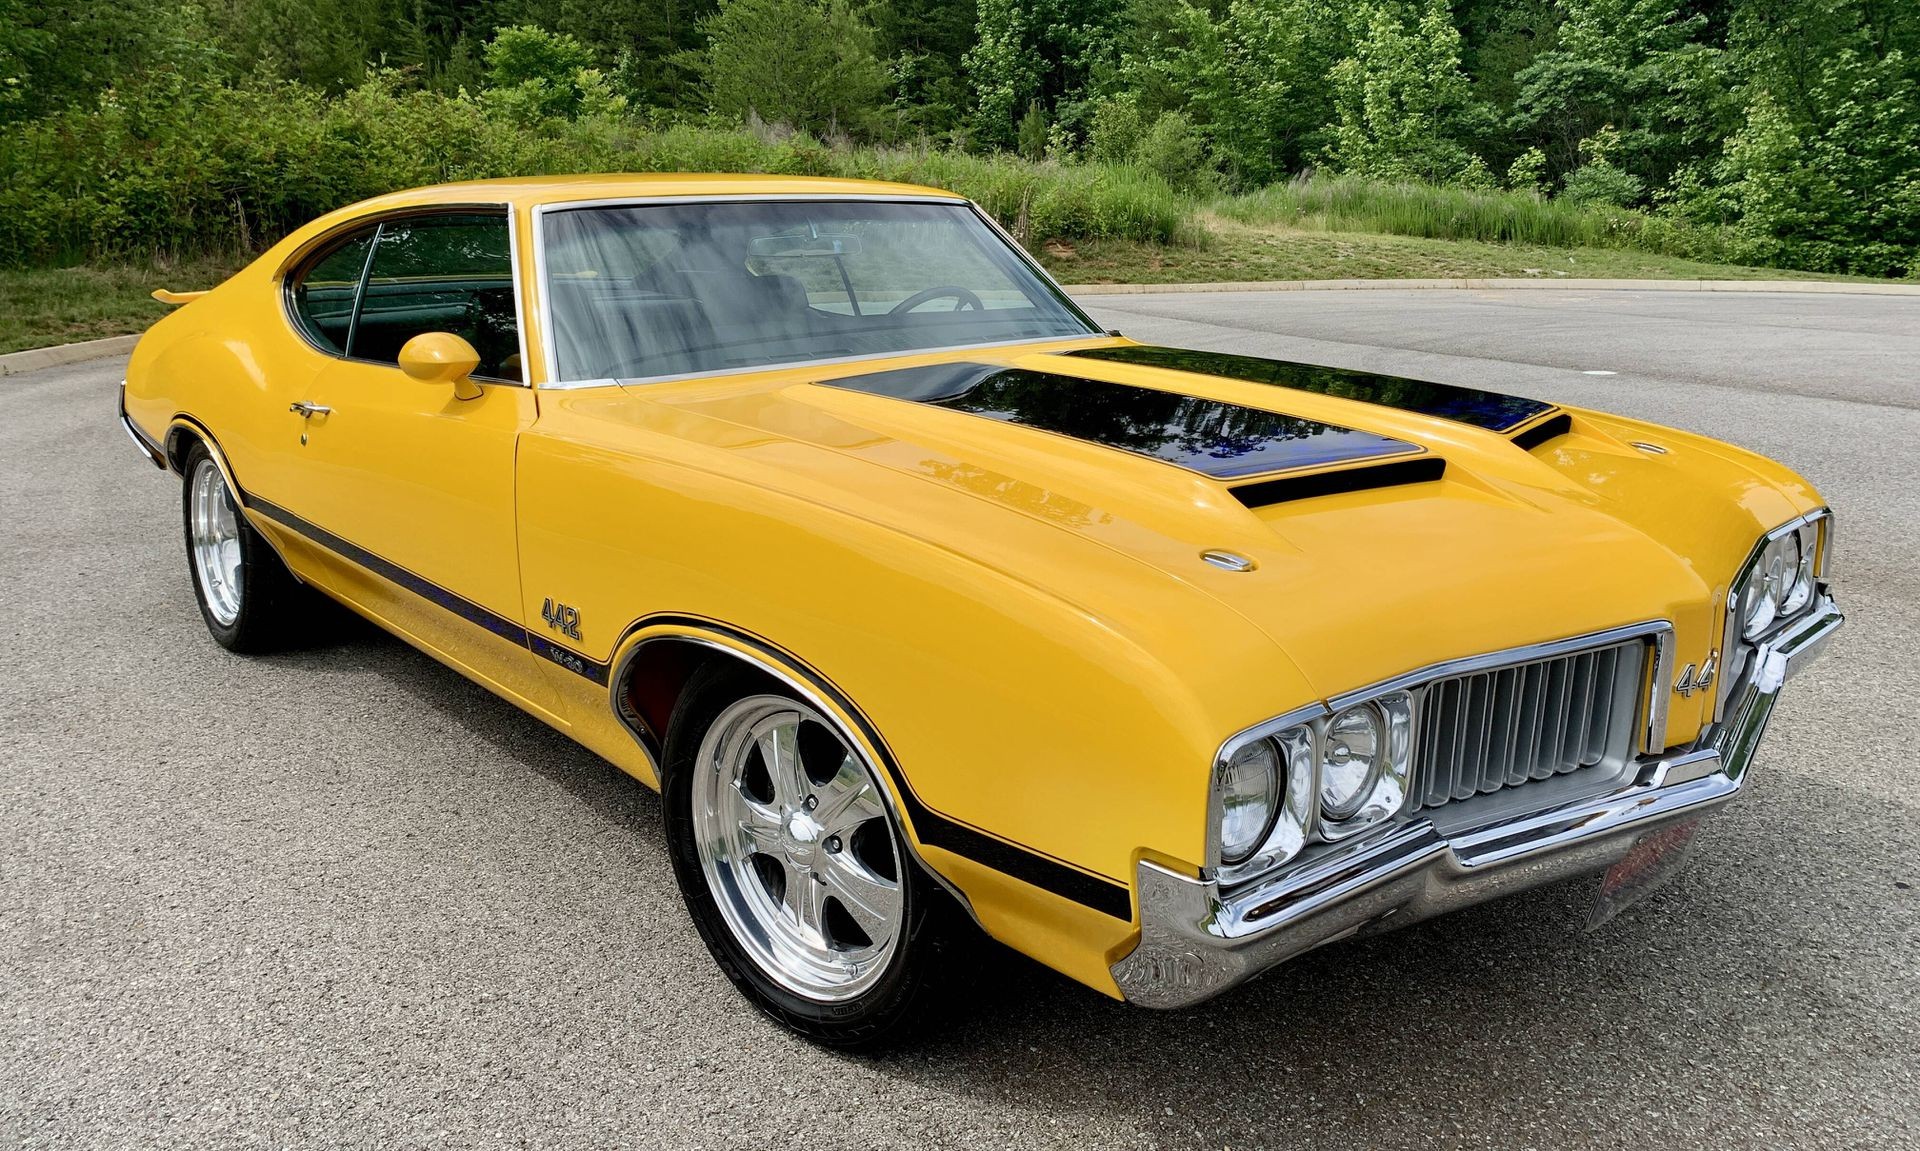 Find of the Day: 1970 Oldsmobile 442 Built to Overtake the Pontiac GTO